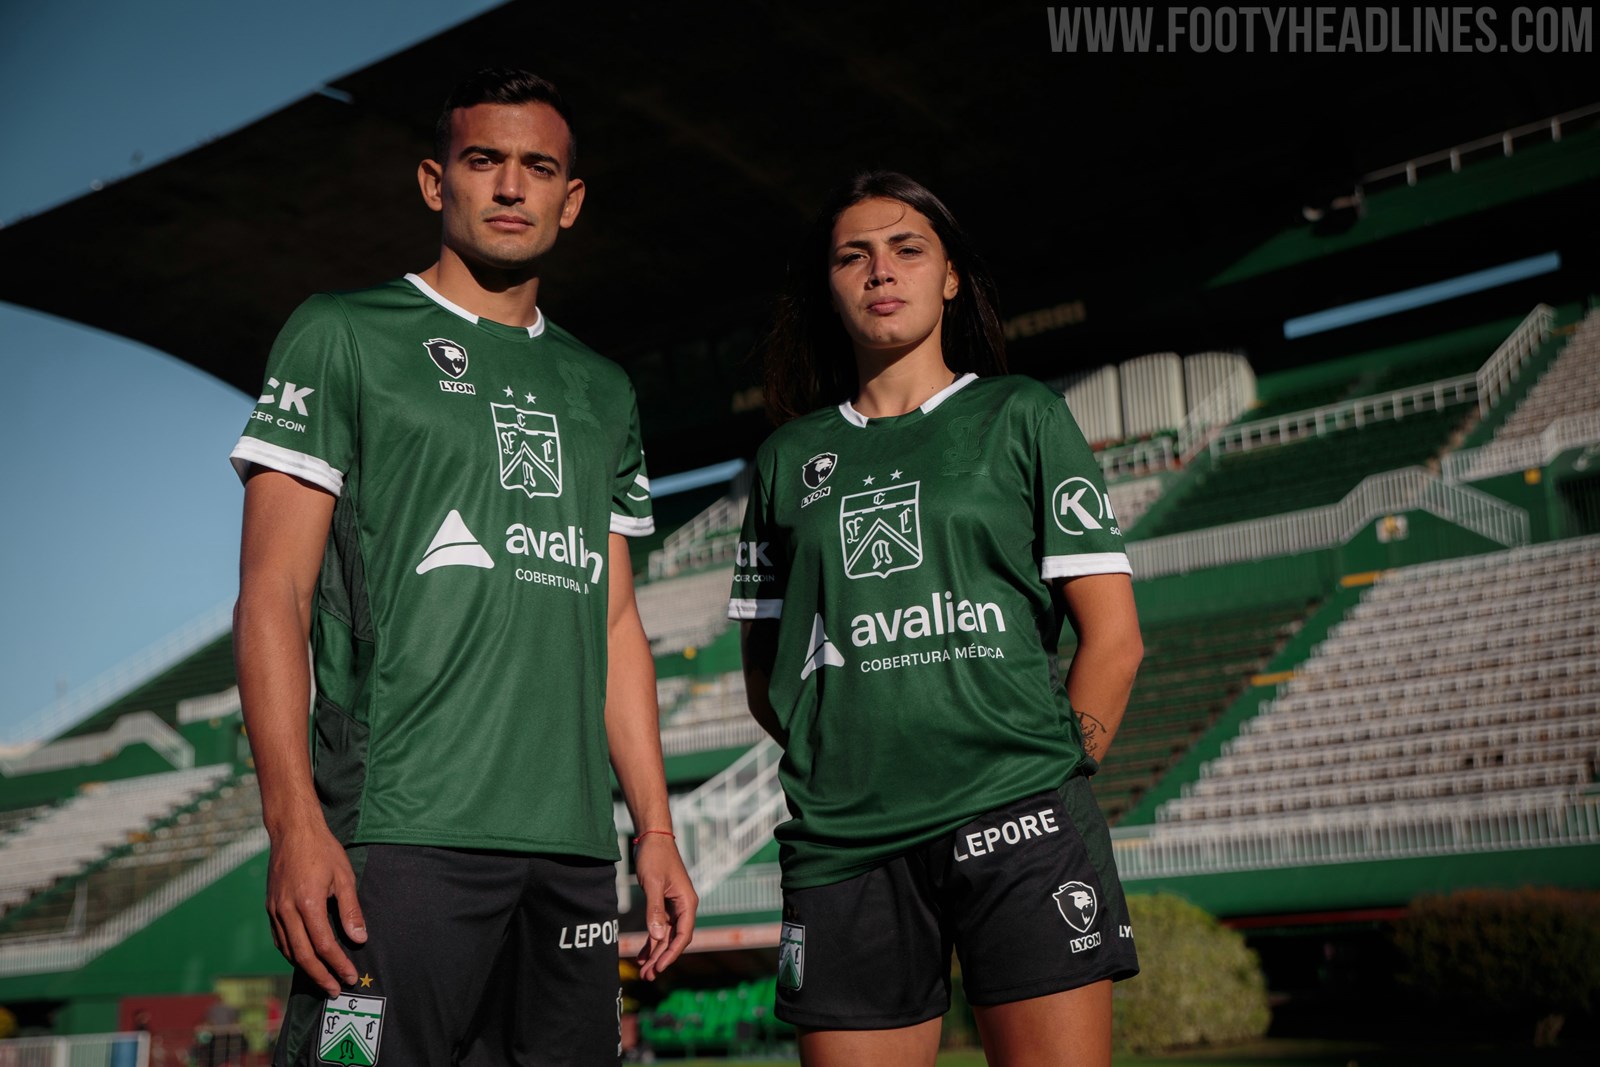 Unique Ferro Carril Oeste 21-22 Home & Away Kits Released - Two Crests On  One Jersey - Footy Headlines